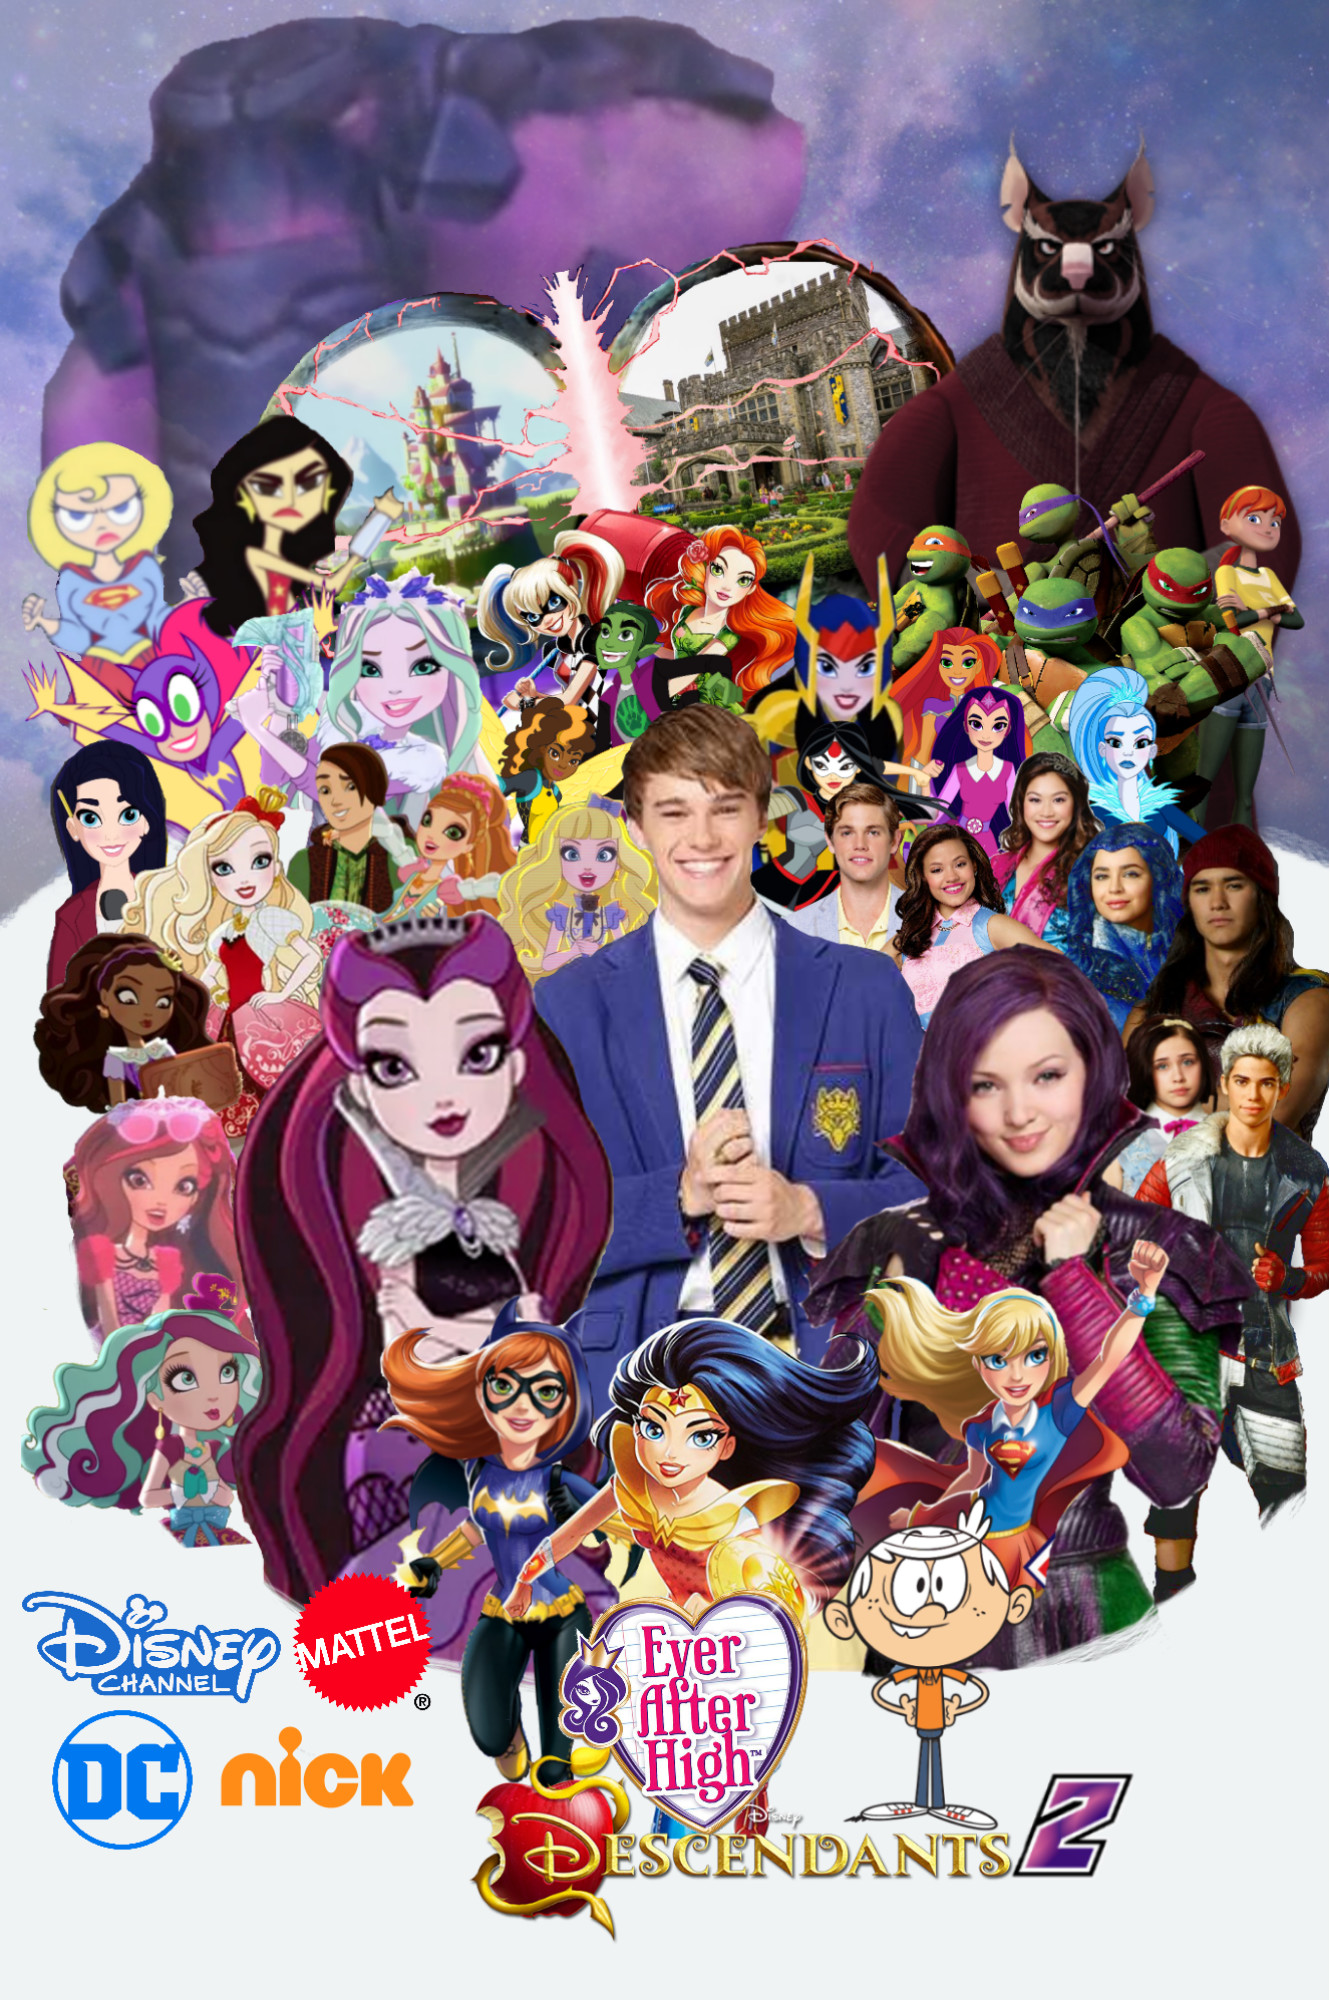 1330x2000 ... AwesomeOKingGuy0123 Ever After High X Disney's Descendants 2 by  AwesomeOKingGuy0123